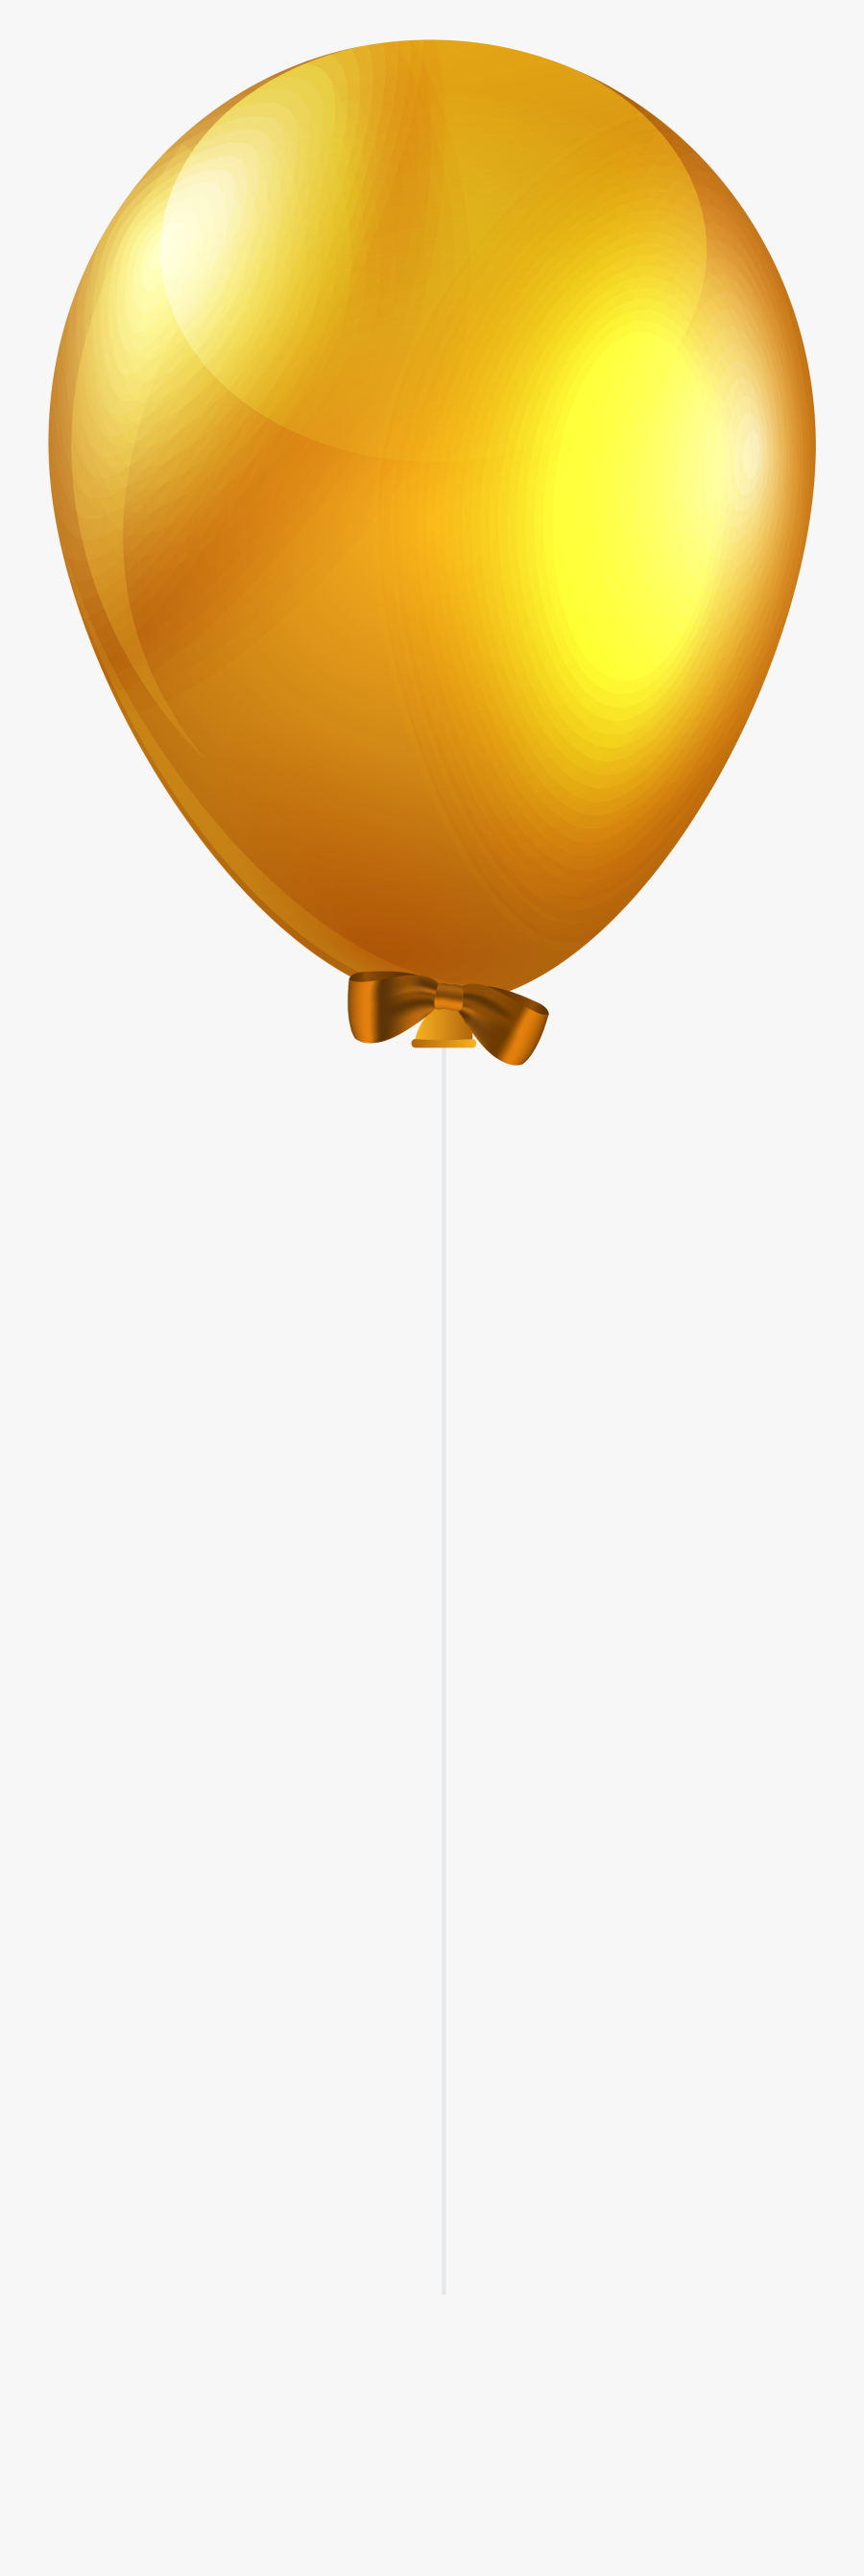 Yellow Single Balloon Png Clip Art Image - Yellow Gold Balloon Png, Transparent Clipart